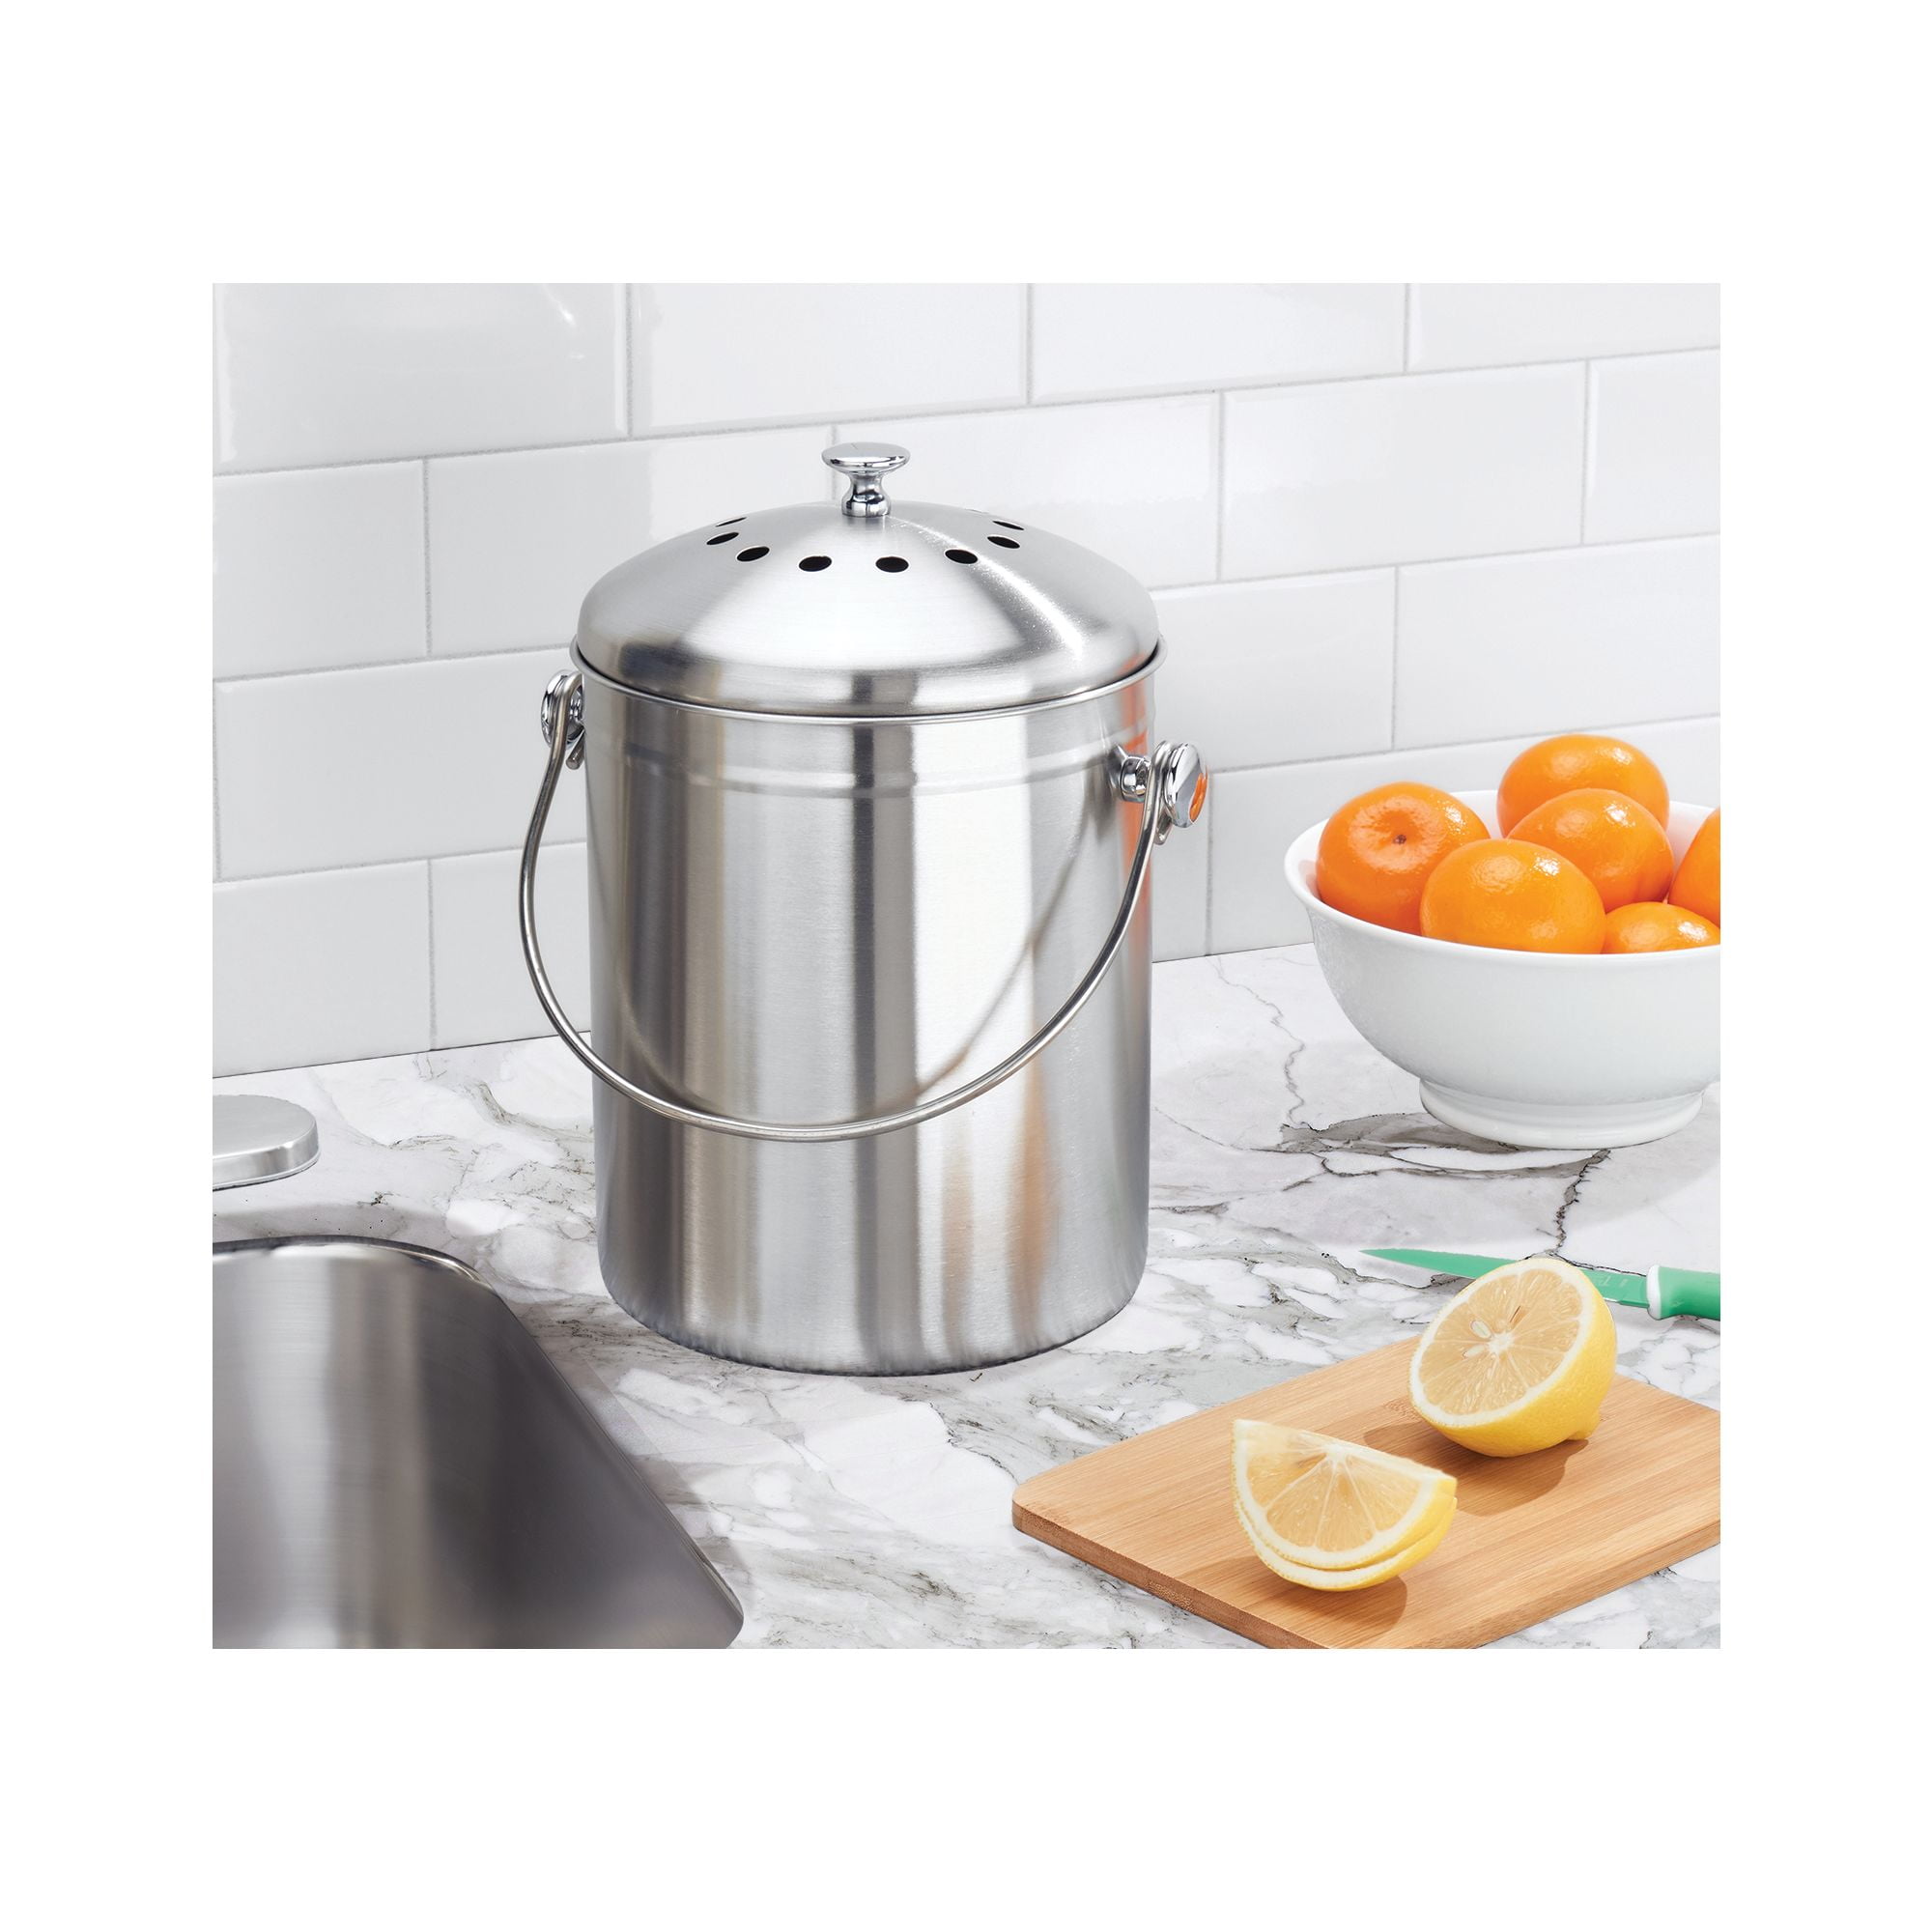 EPICA Countertop Compost Bin Kitchen | 1.3 Gallon | Odorless Composting Bin  with Carbon Filters | Indoor Compost Bin with Lid | Stainless Steel